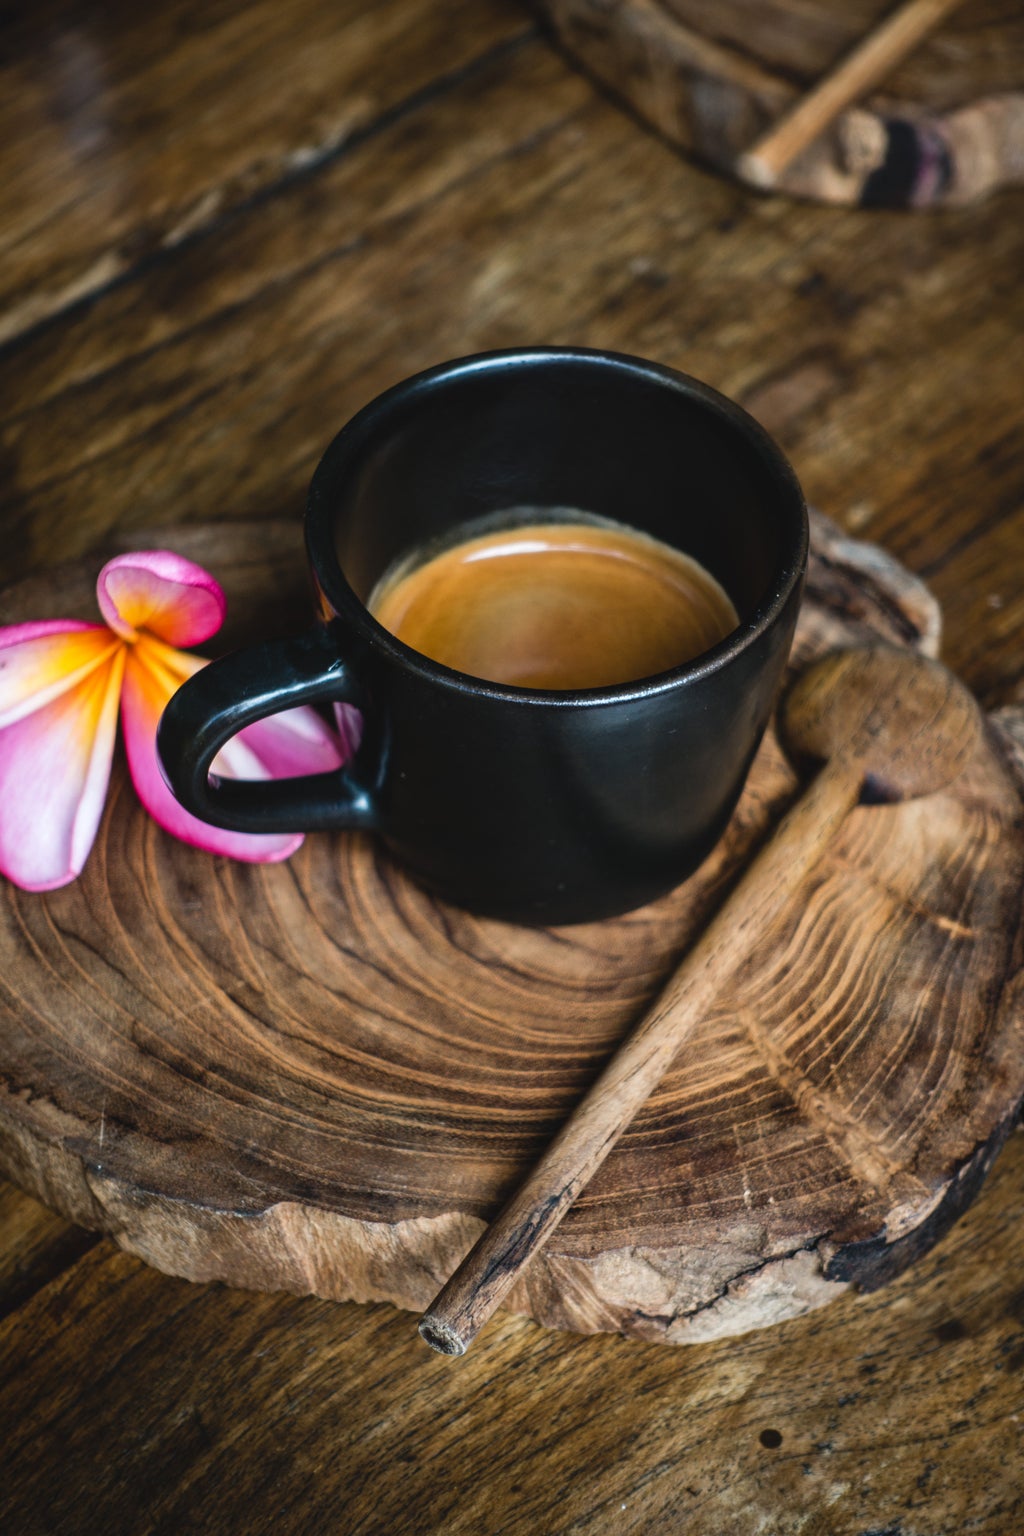 coffee in a black mug with a pink flower next to it